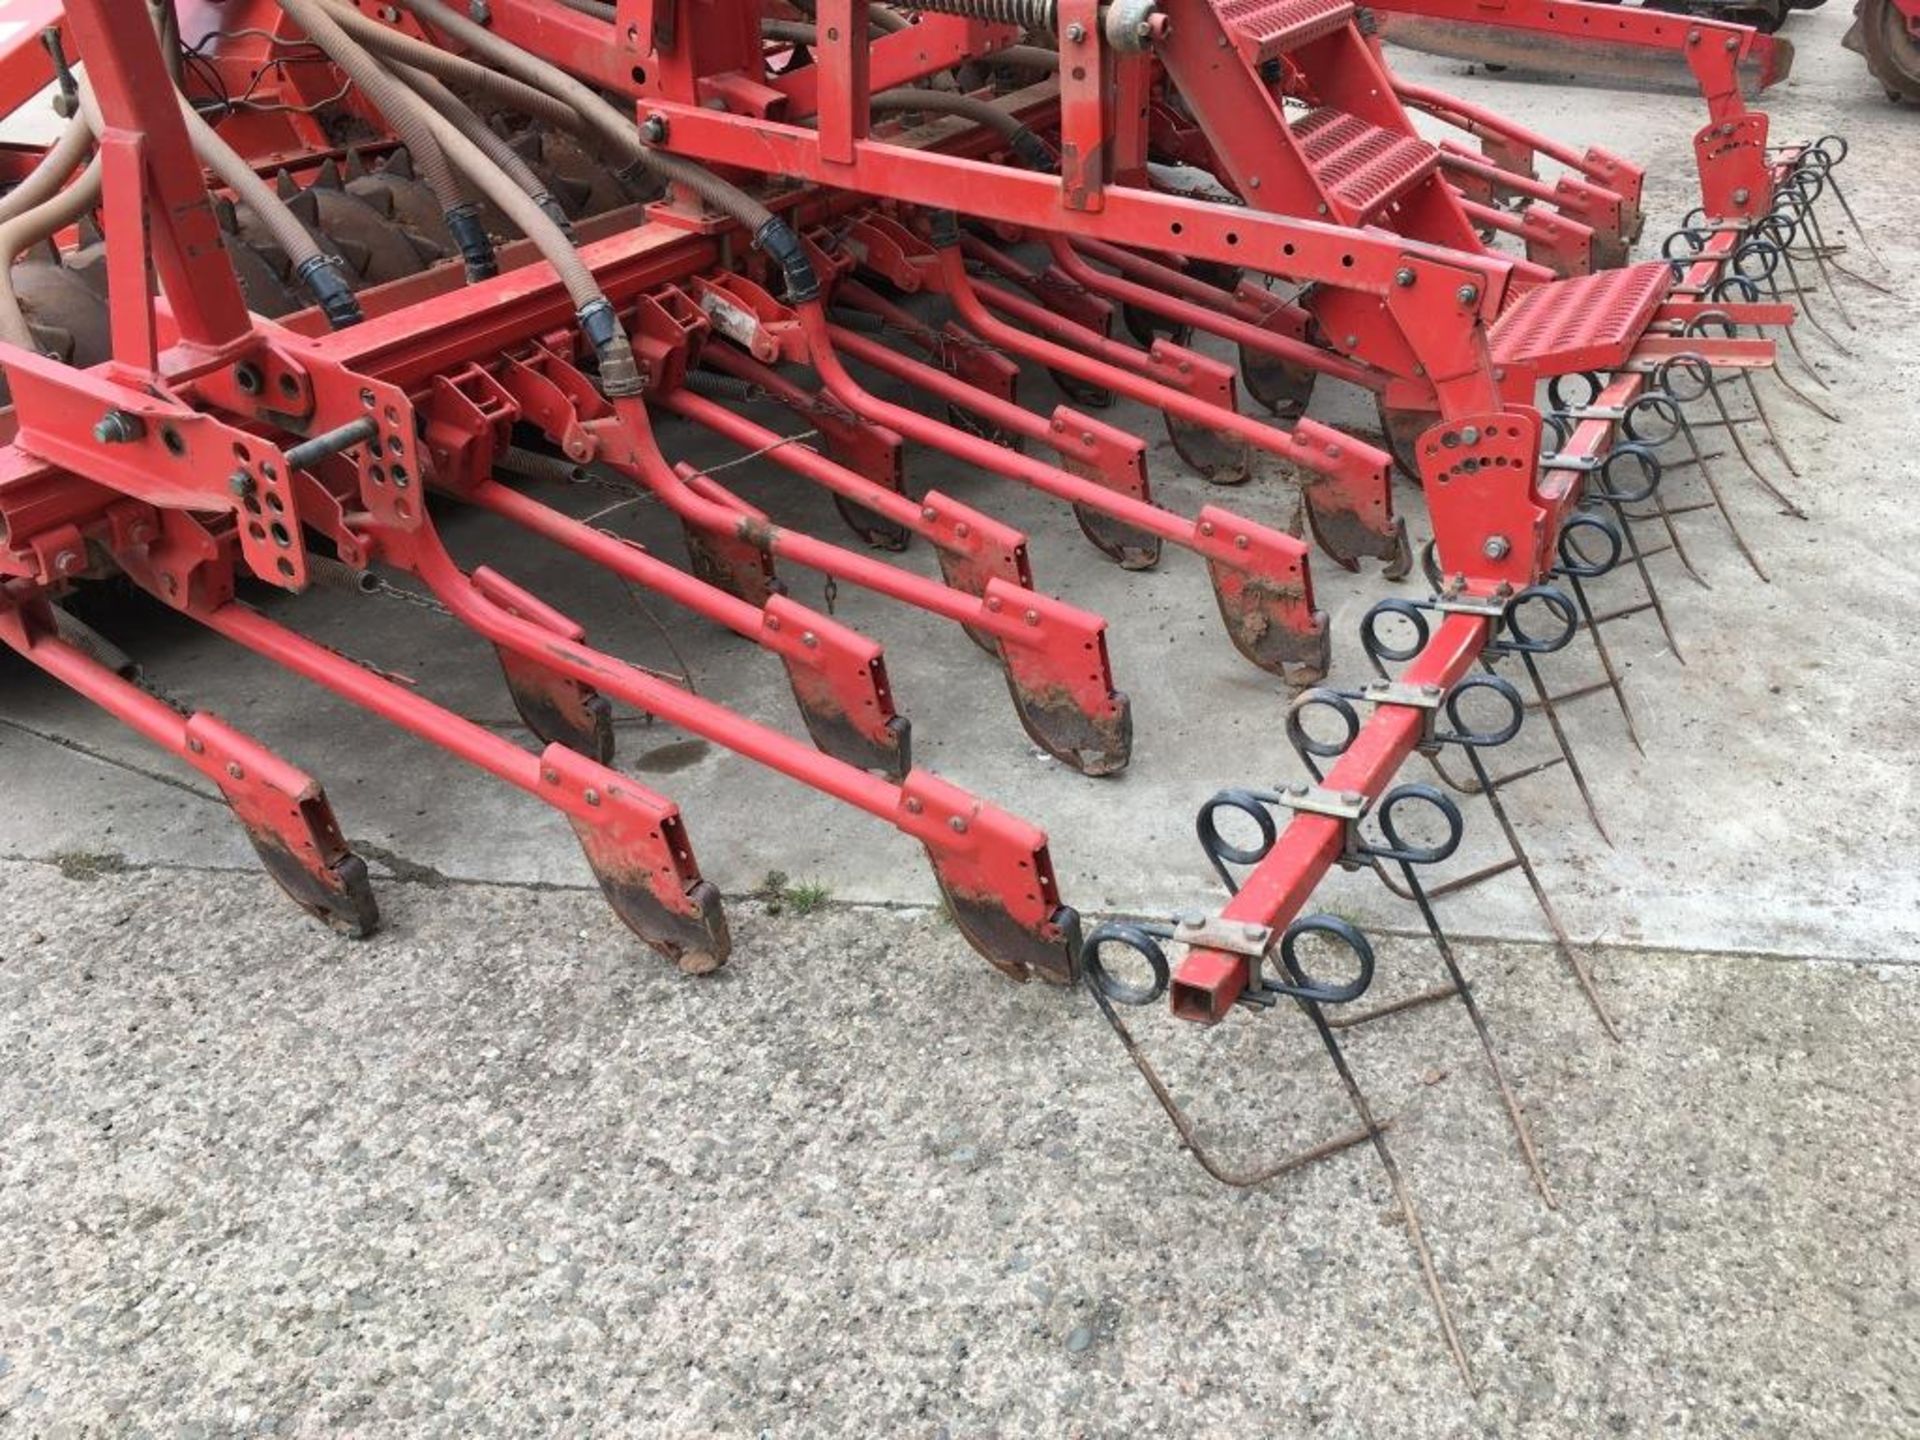 Kuhn HR 4003D 14' power harrow, serial number: A4631 (2002) with Kuhn Venta LC 402 seed drill, - Bild 10 aus 15